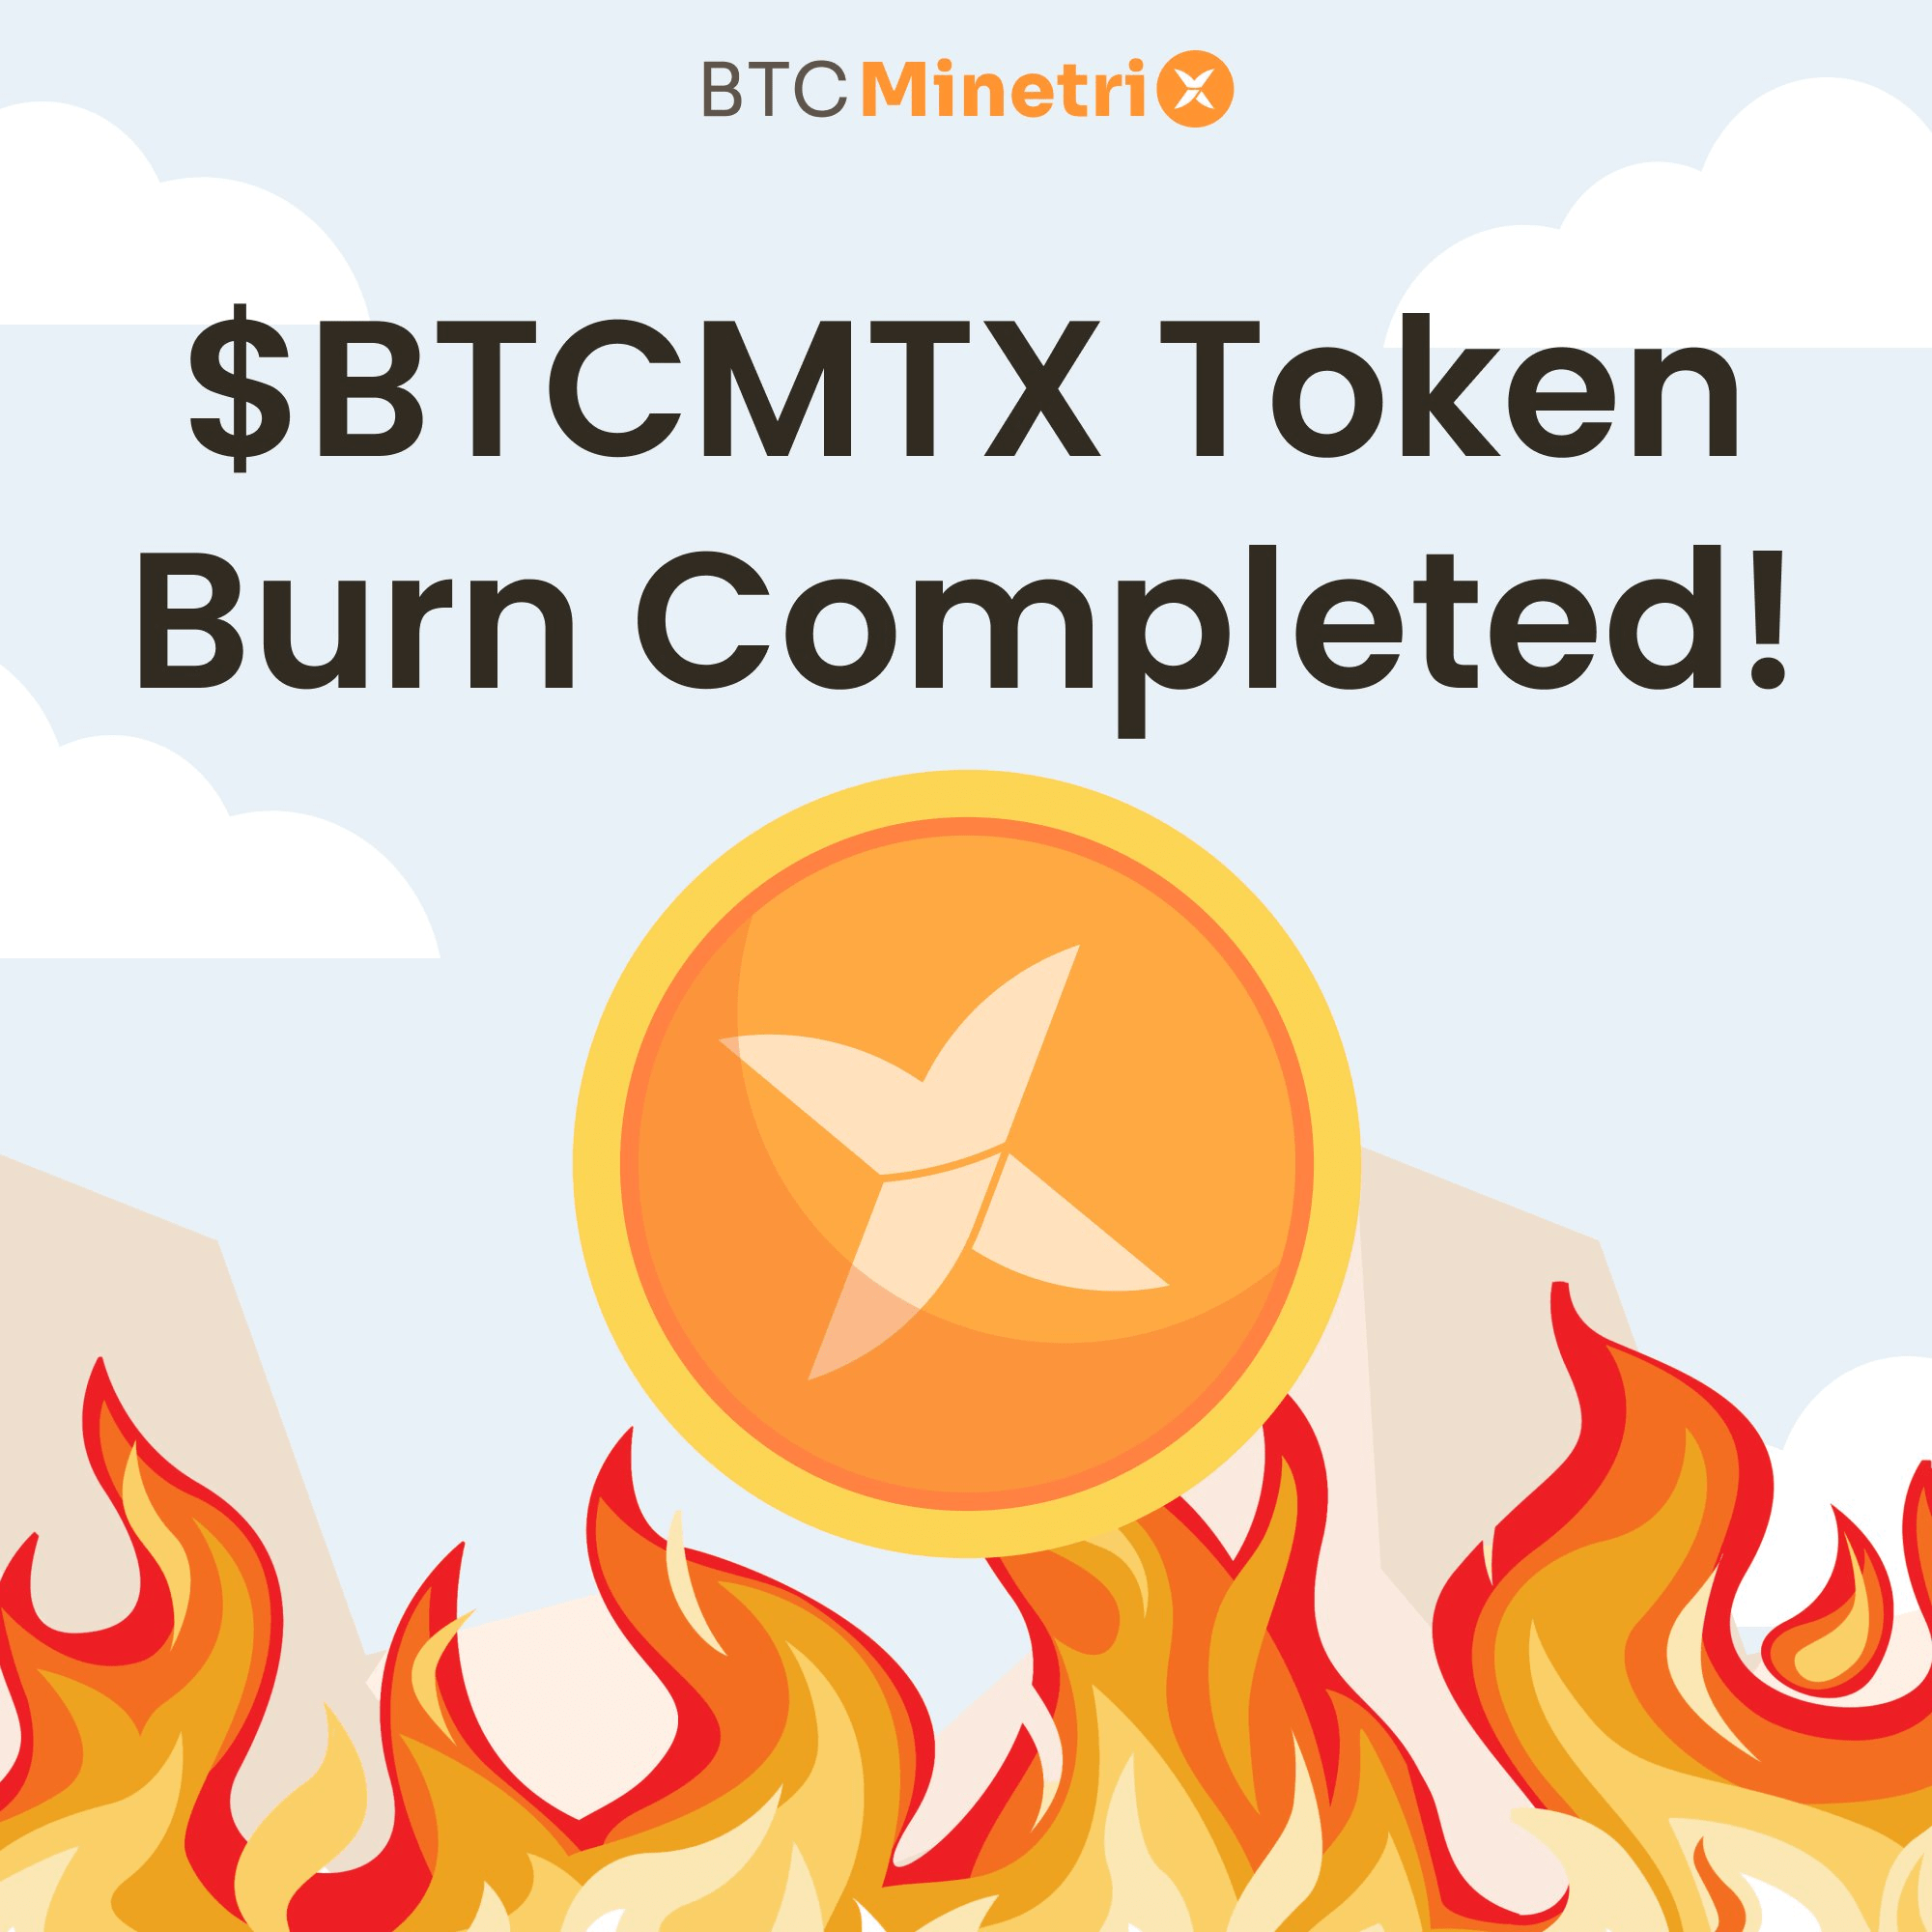 Bitcoin%20Minetrix%20Up%20After%20Token%20Burn%2C%20Crypto%20Prices%20Recover%20 %20Predictions%20For%20BTCMTX%2C%20BTC